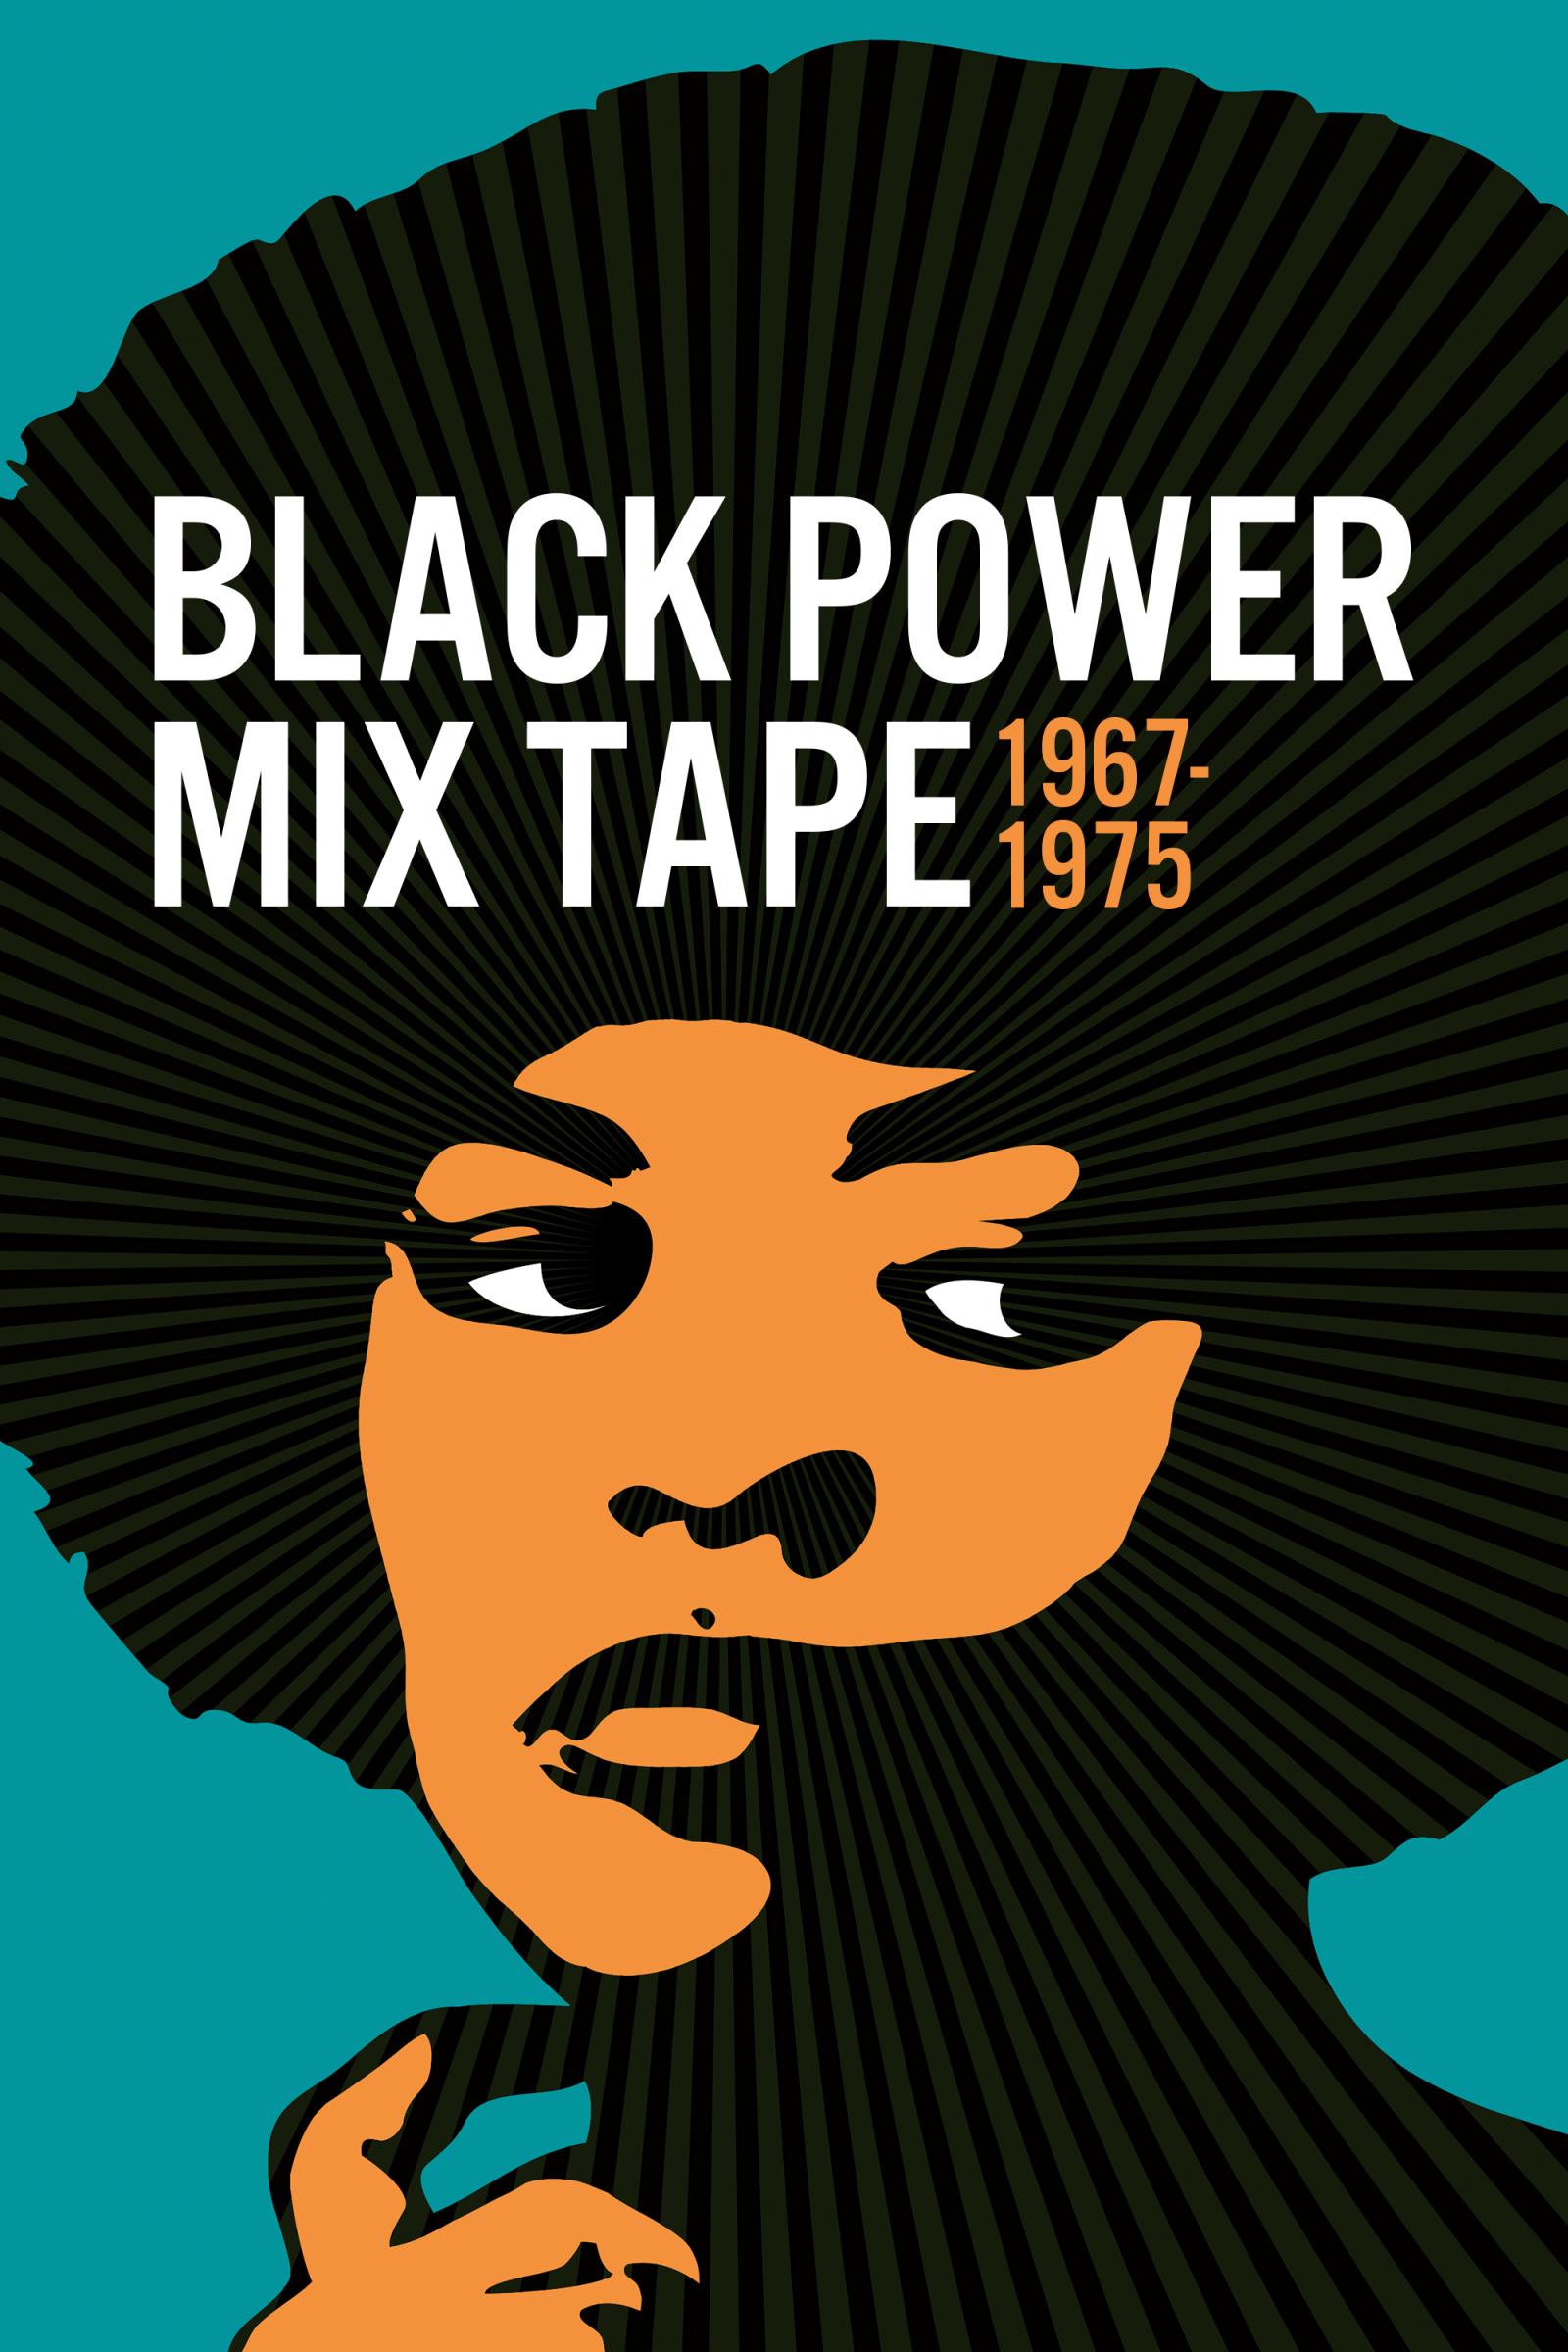 Where to stream The Black Power Mix Tape 1967-1975